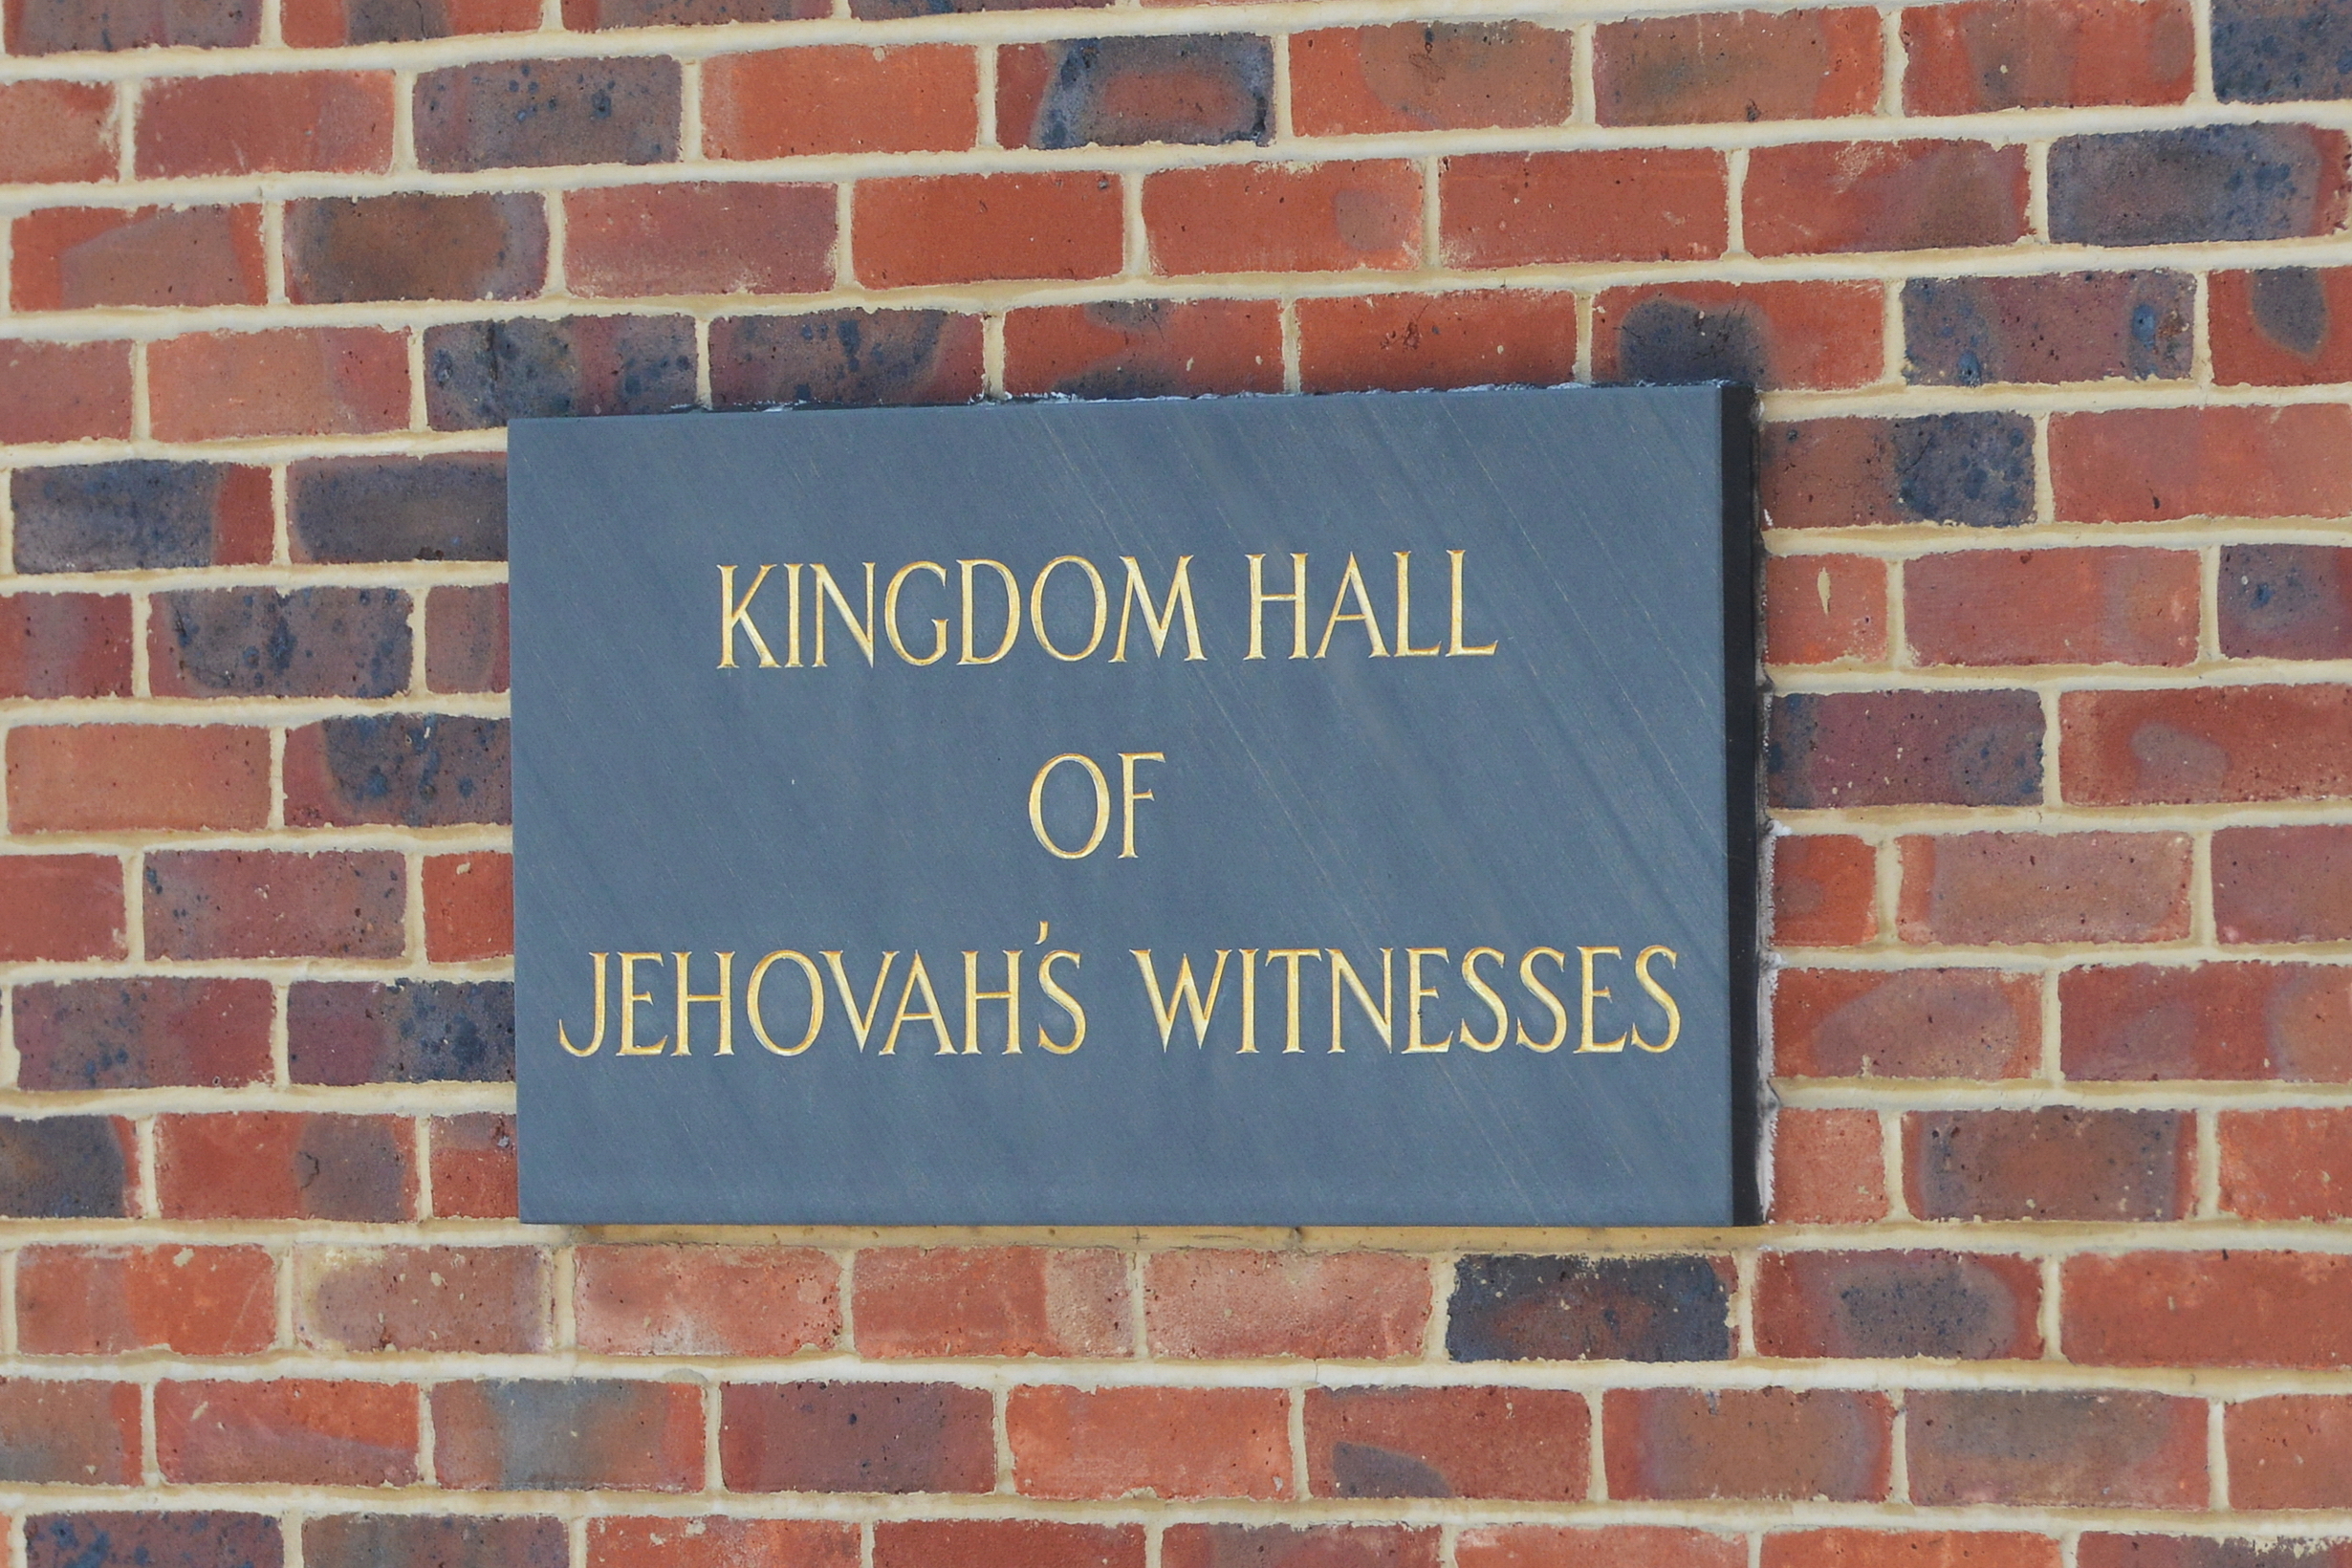 Jehovah's witnesses sexual abuse cover up